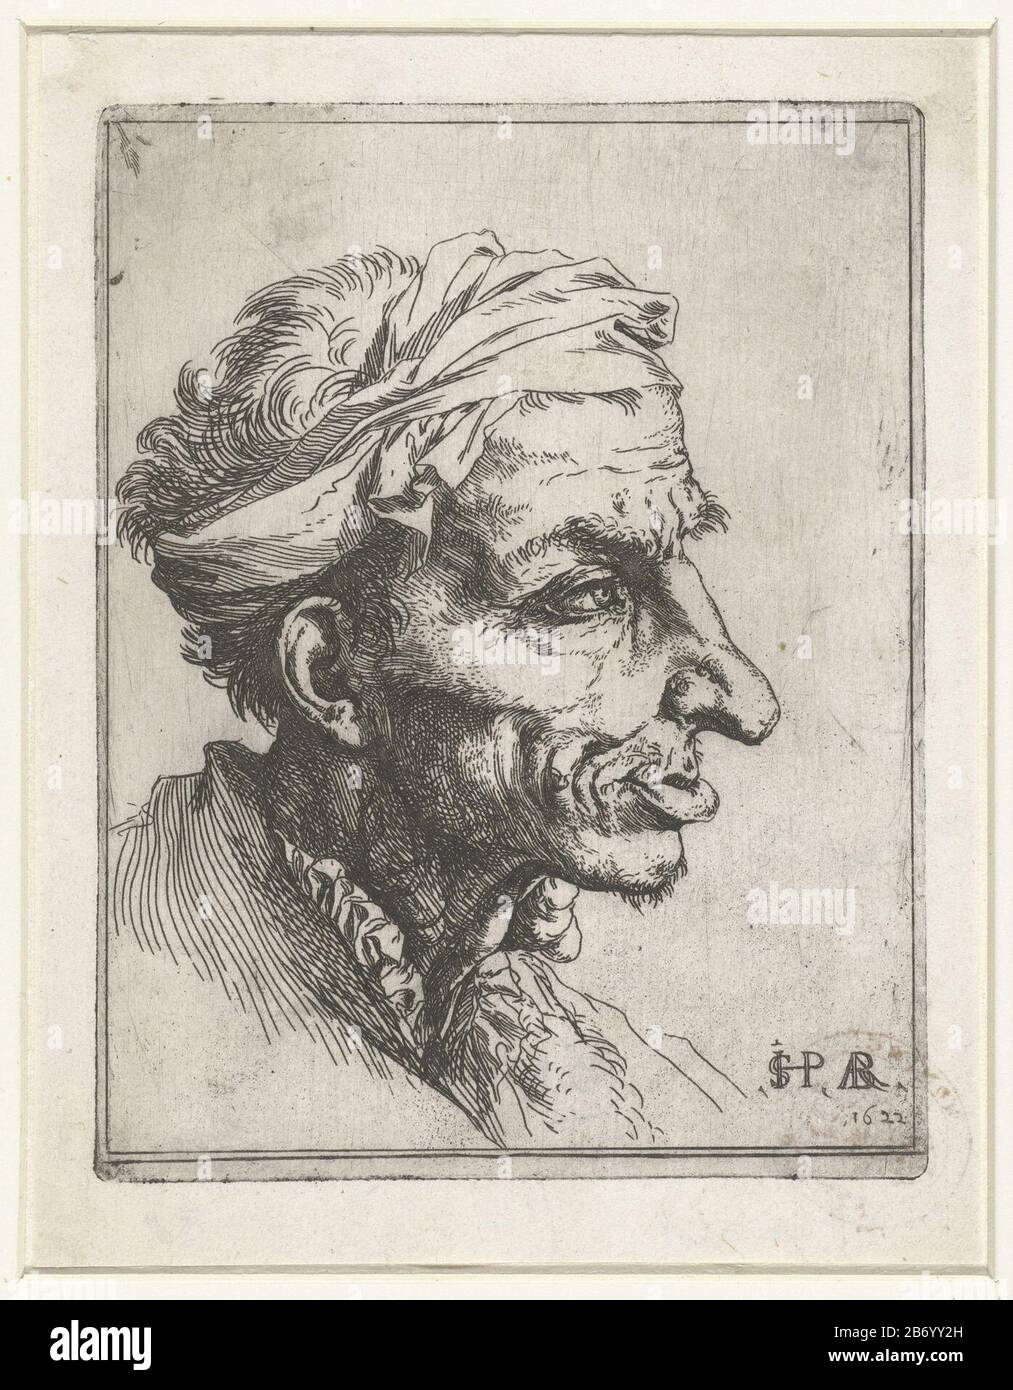 Klein grotesk hoofd Head of an Old man with a band around his head, in profile. In his neck a gezwel. Manufacturer : printmaker: Jusepe de Ribera (listed building) in its design: Jusepe de RiberaPlaats manufacture: Naples Date: 1622 Physical features: etching material: paper Technique: etching Dimensions: plate edge: H 145 mm × W 112 mmToelichtingDe man in his neck tumor, a sign of the disease Von Recklinghausen (Neurofibromatosis) . Subject: disabilities, deformationsdiseases Affecting parts of the body and right Stock Photo